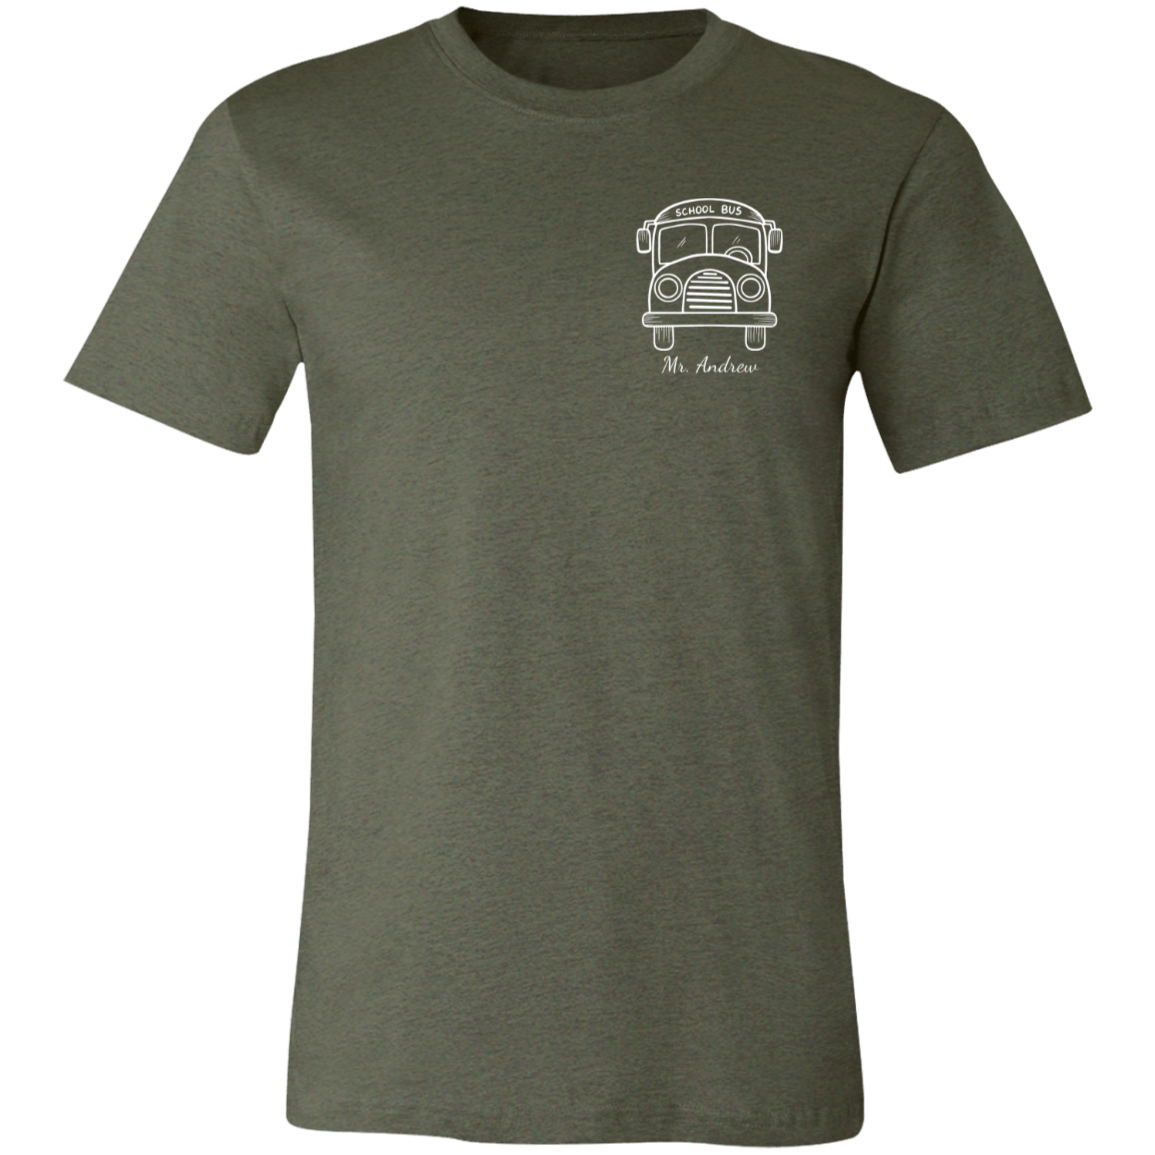 Personalized, Proud Member of the  Bus Driver Club T-Shirt